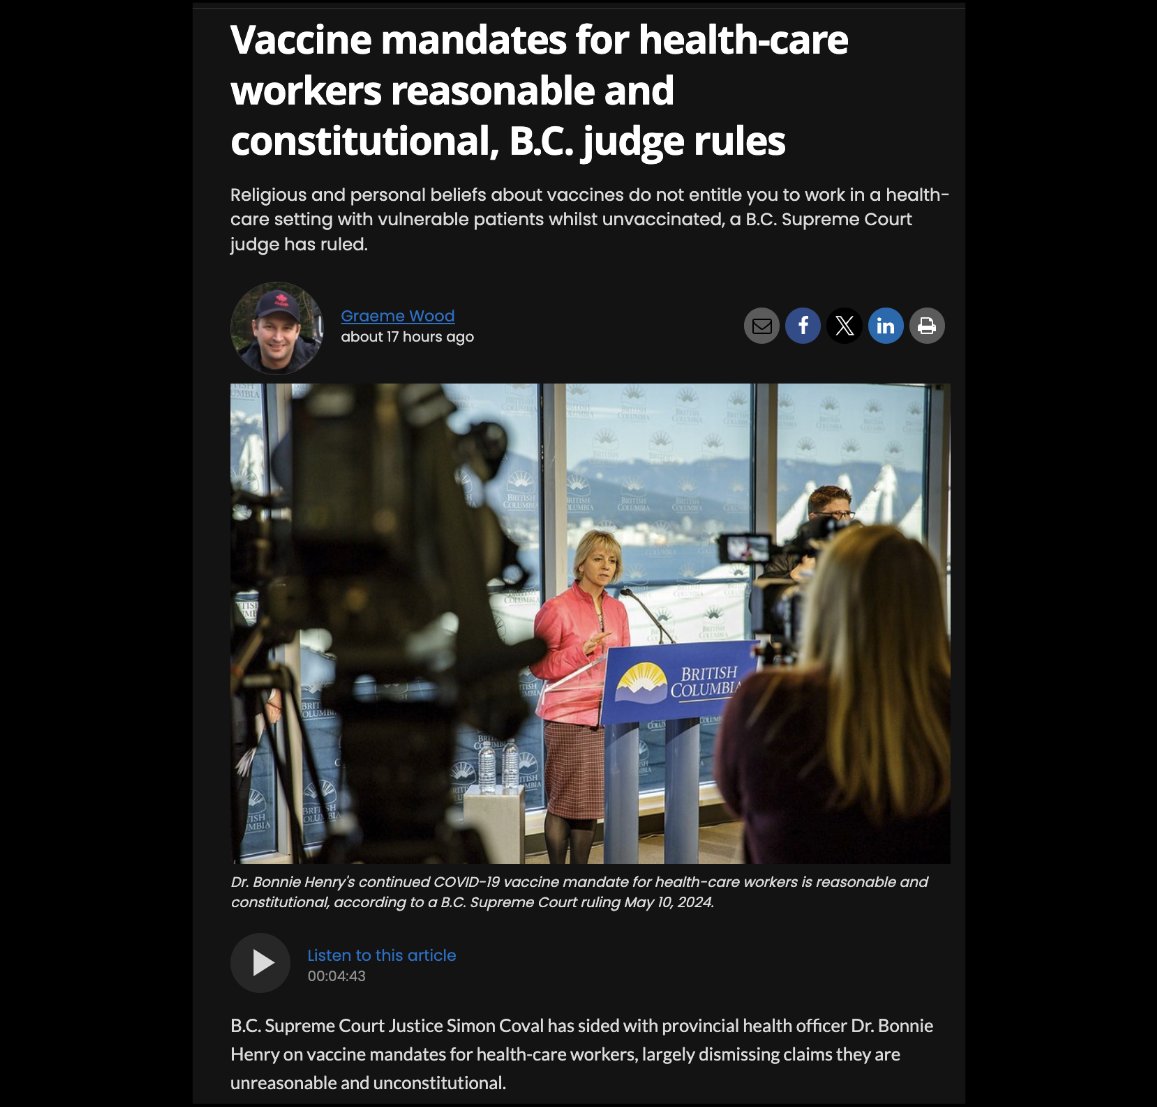 BC's courts are rigged.

Even after the mRNA injections have been revealed to be both harmful and ineffective, the BC judiciary is still totally fine with fascist 'vaccine mandates'.

BC has become a total disgrace.